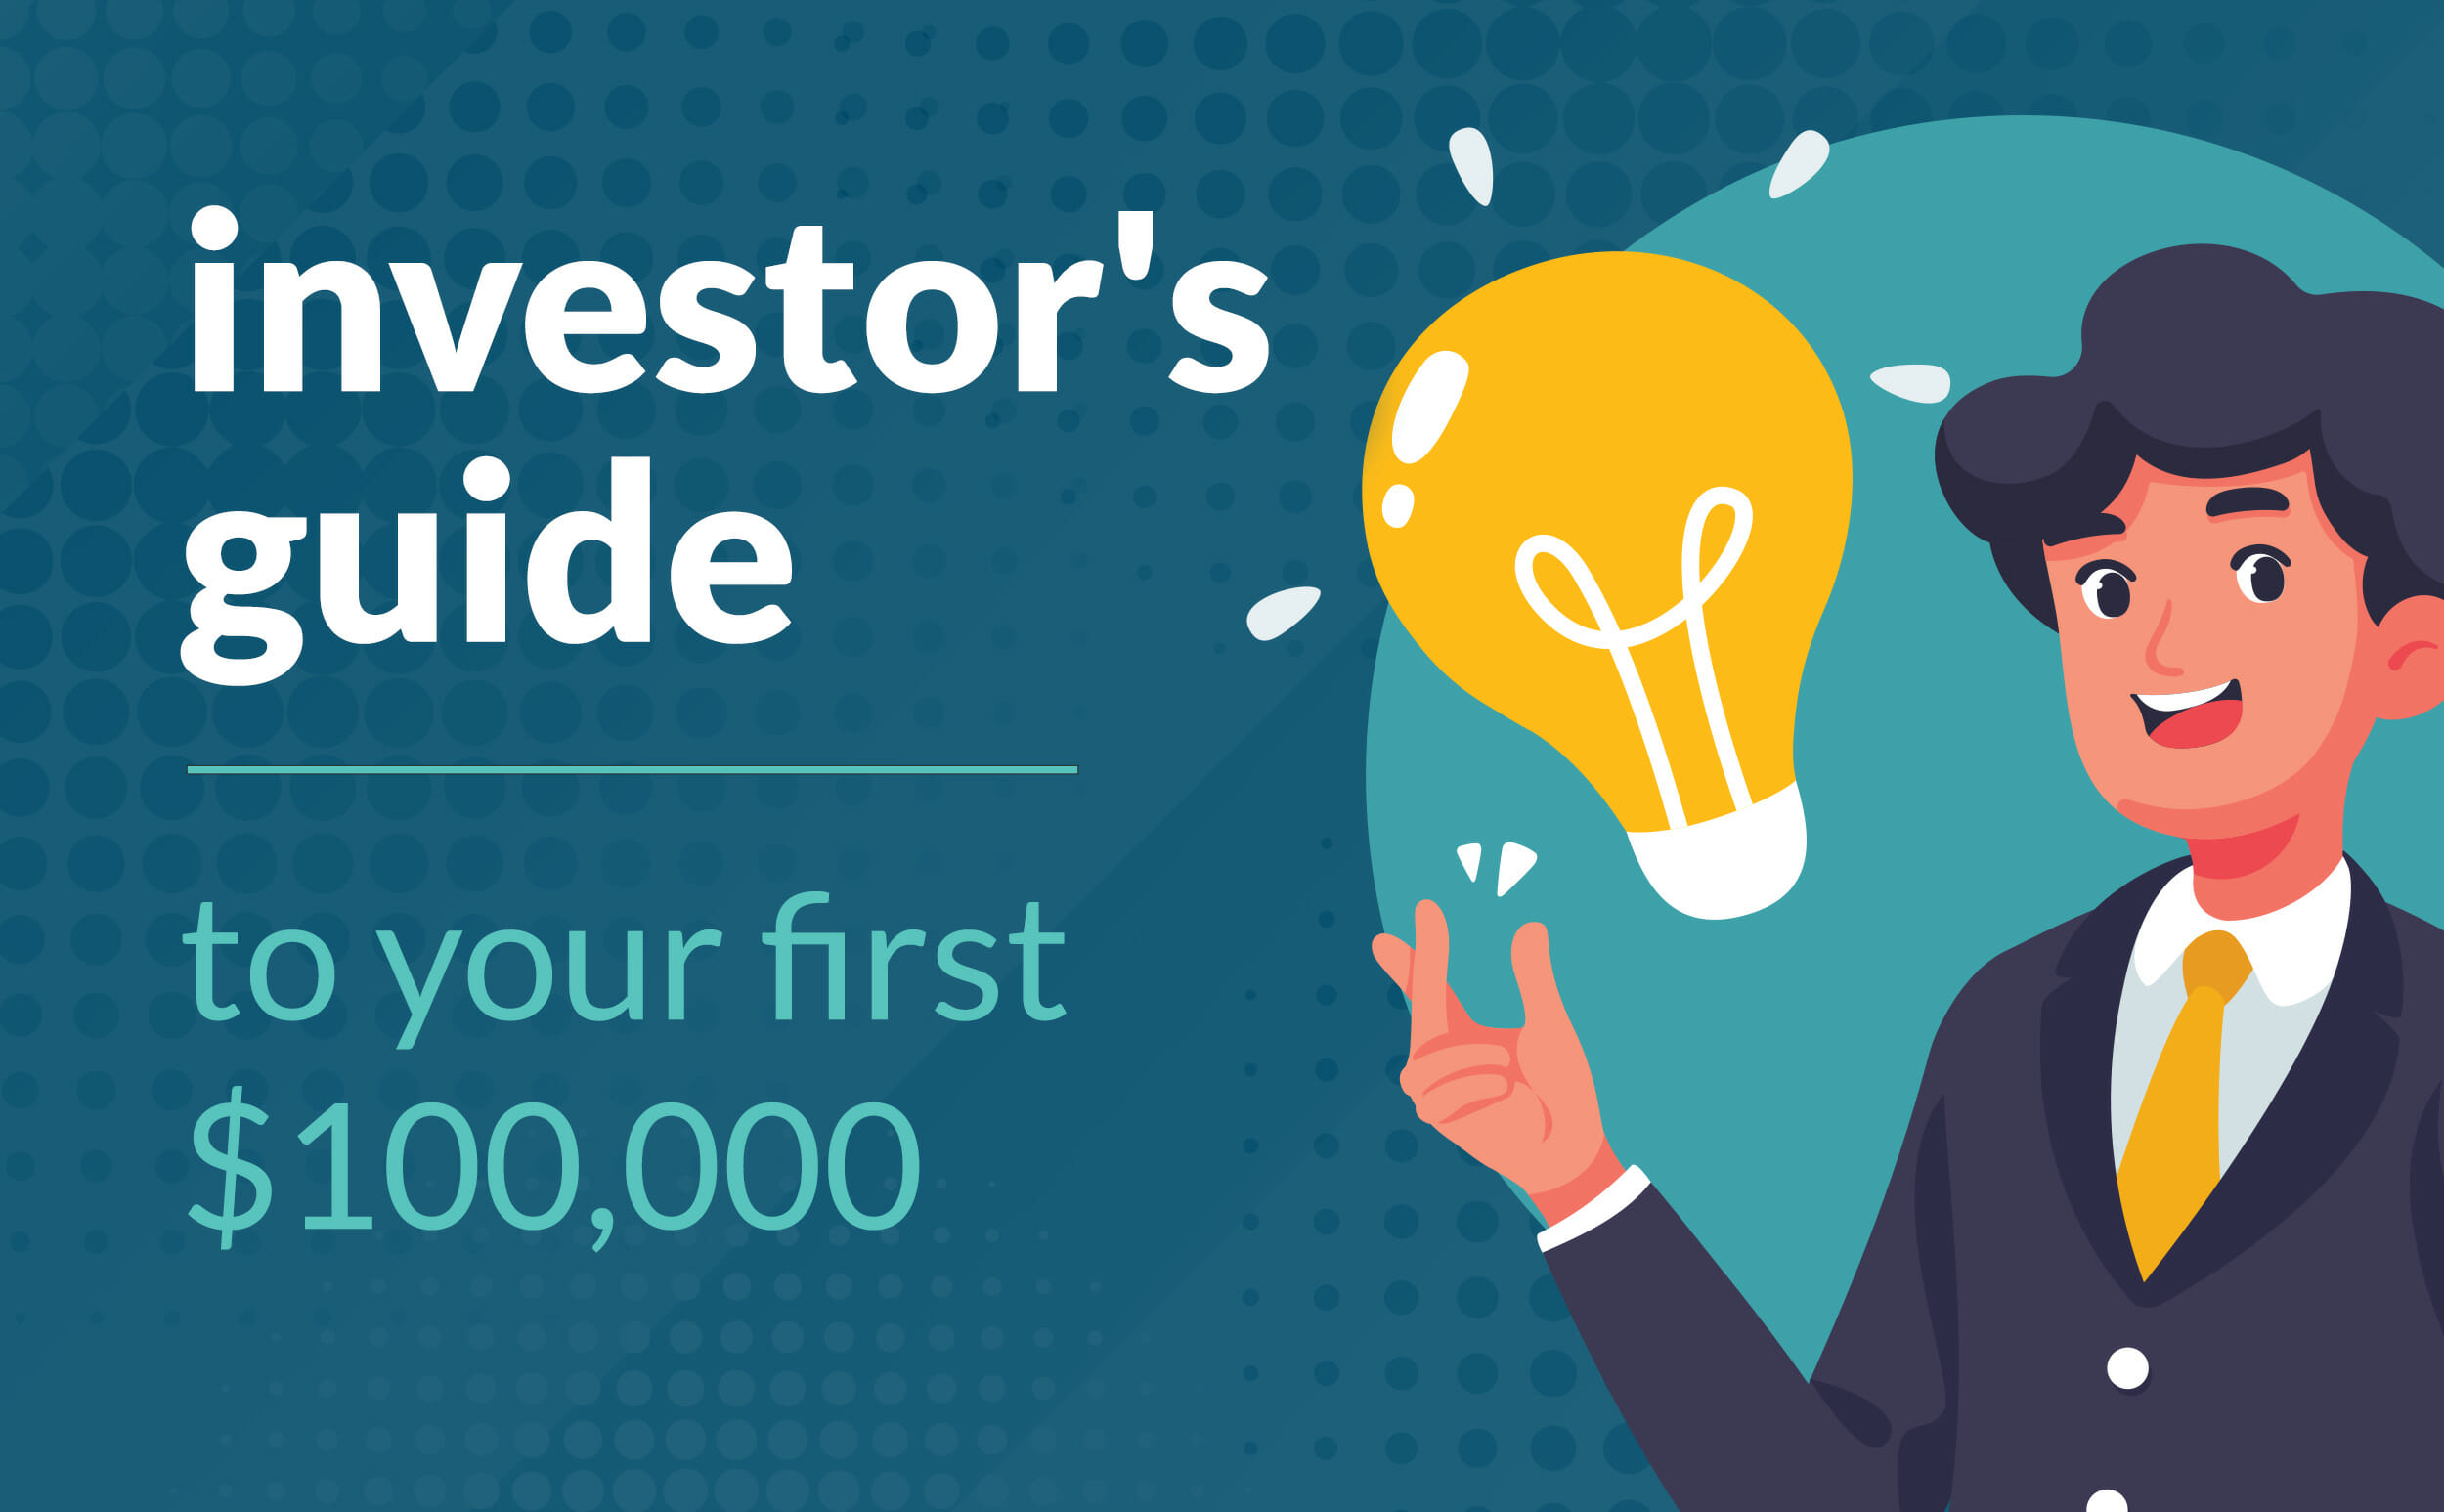 An investor’s guide to your first $100,000